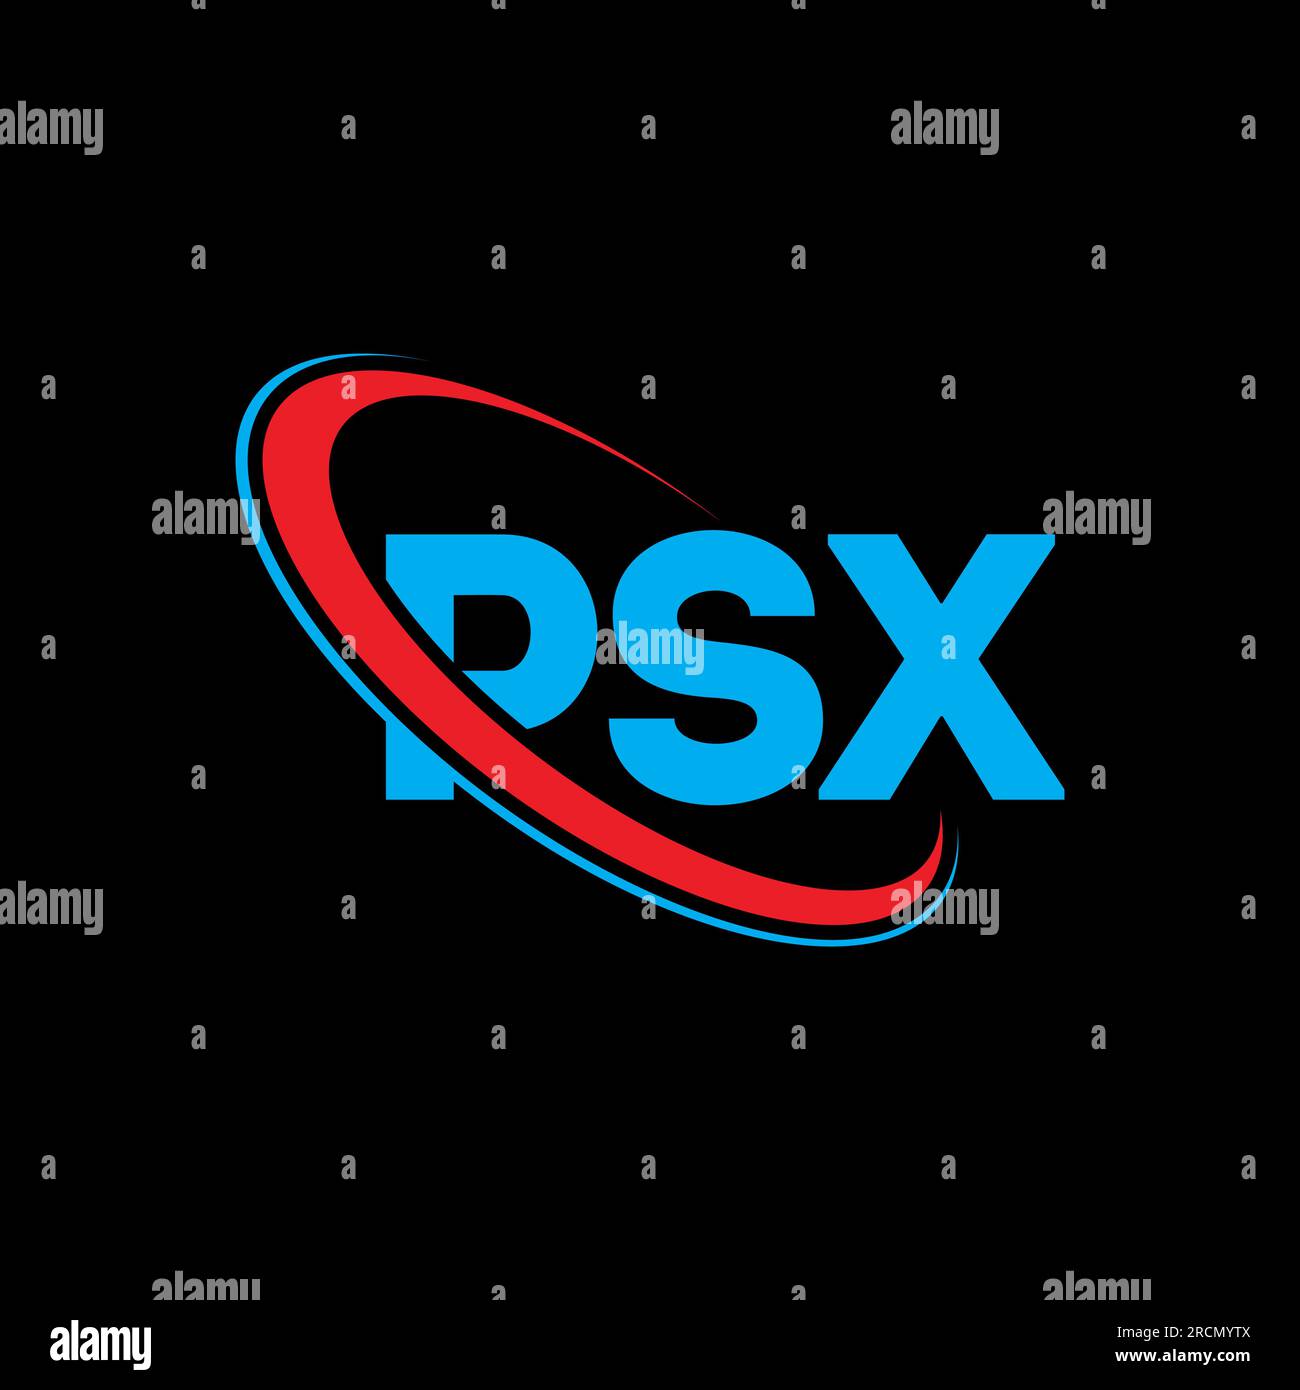 PSX logo. PSX letter. PSX letter logo design. Initials PSX logo linked with circle and uppercase monogram logo. PSX typography for technology, busines Stock Vector